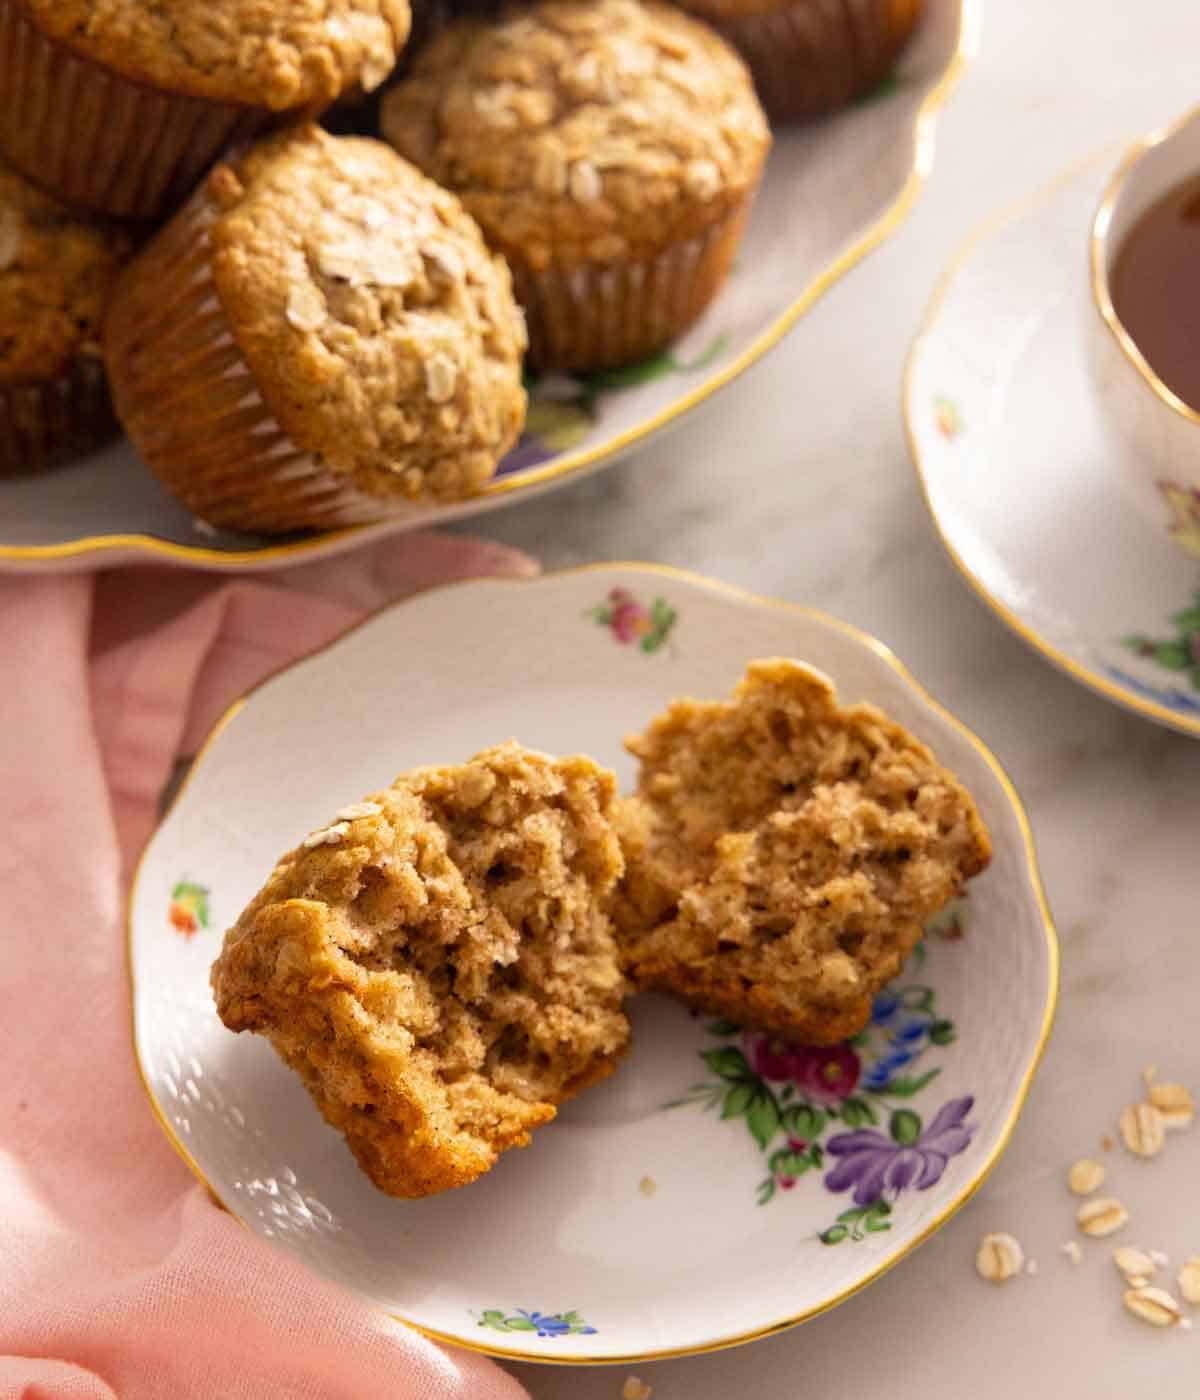 A plate with a oatmeal muffin, torn in half.